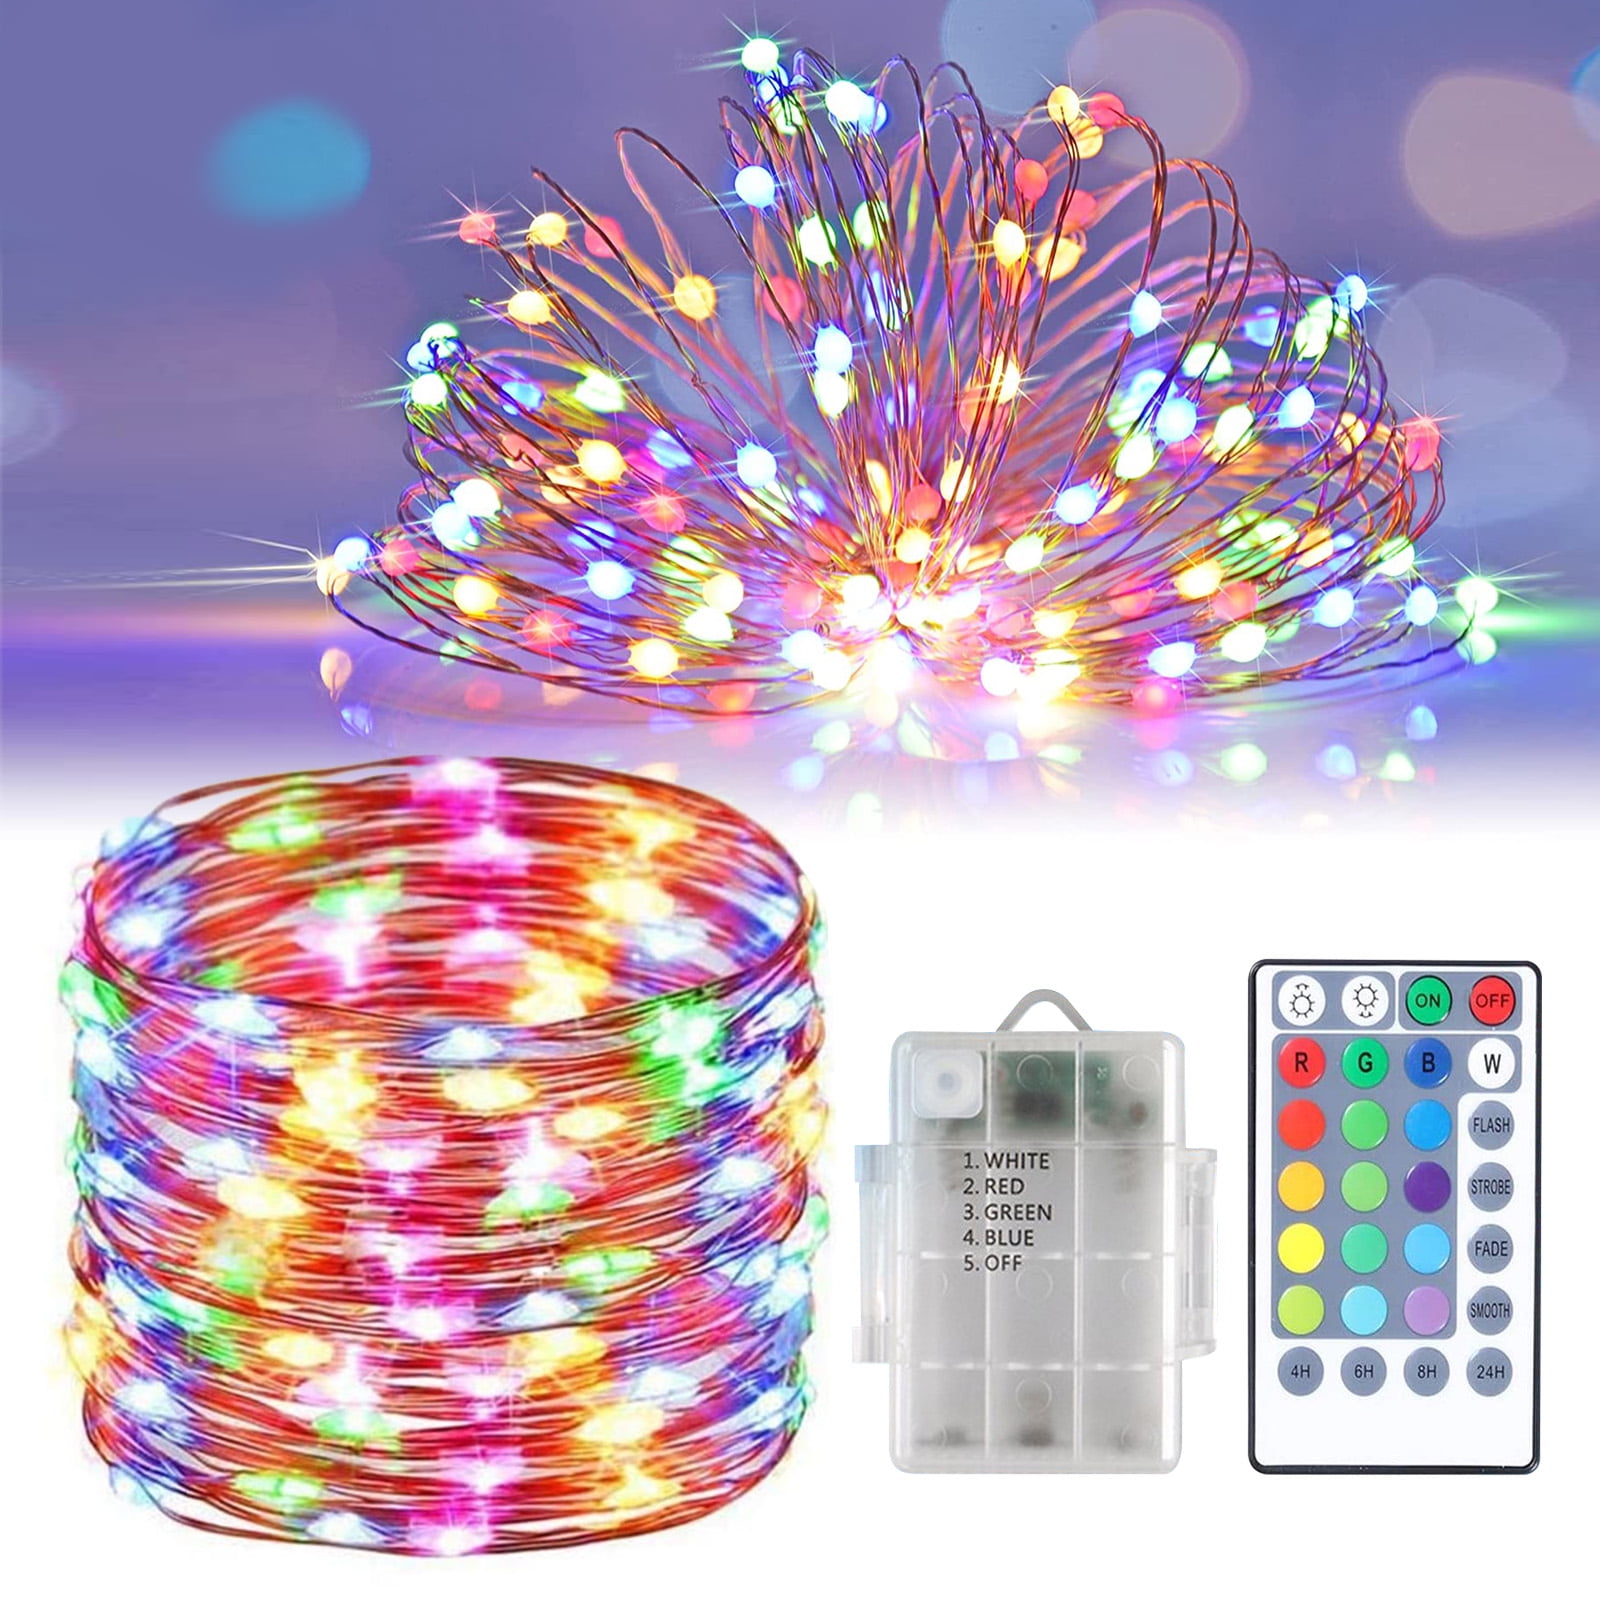 50/100 LED Battery Operated Remote Control String Fairy Light Christmas Decor US 